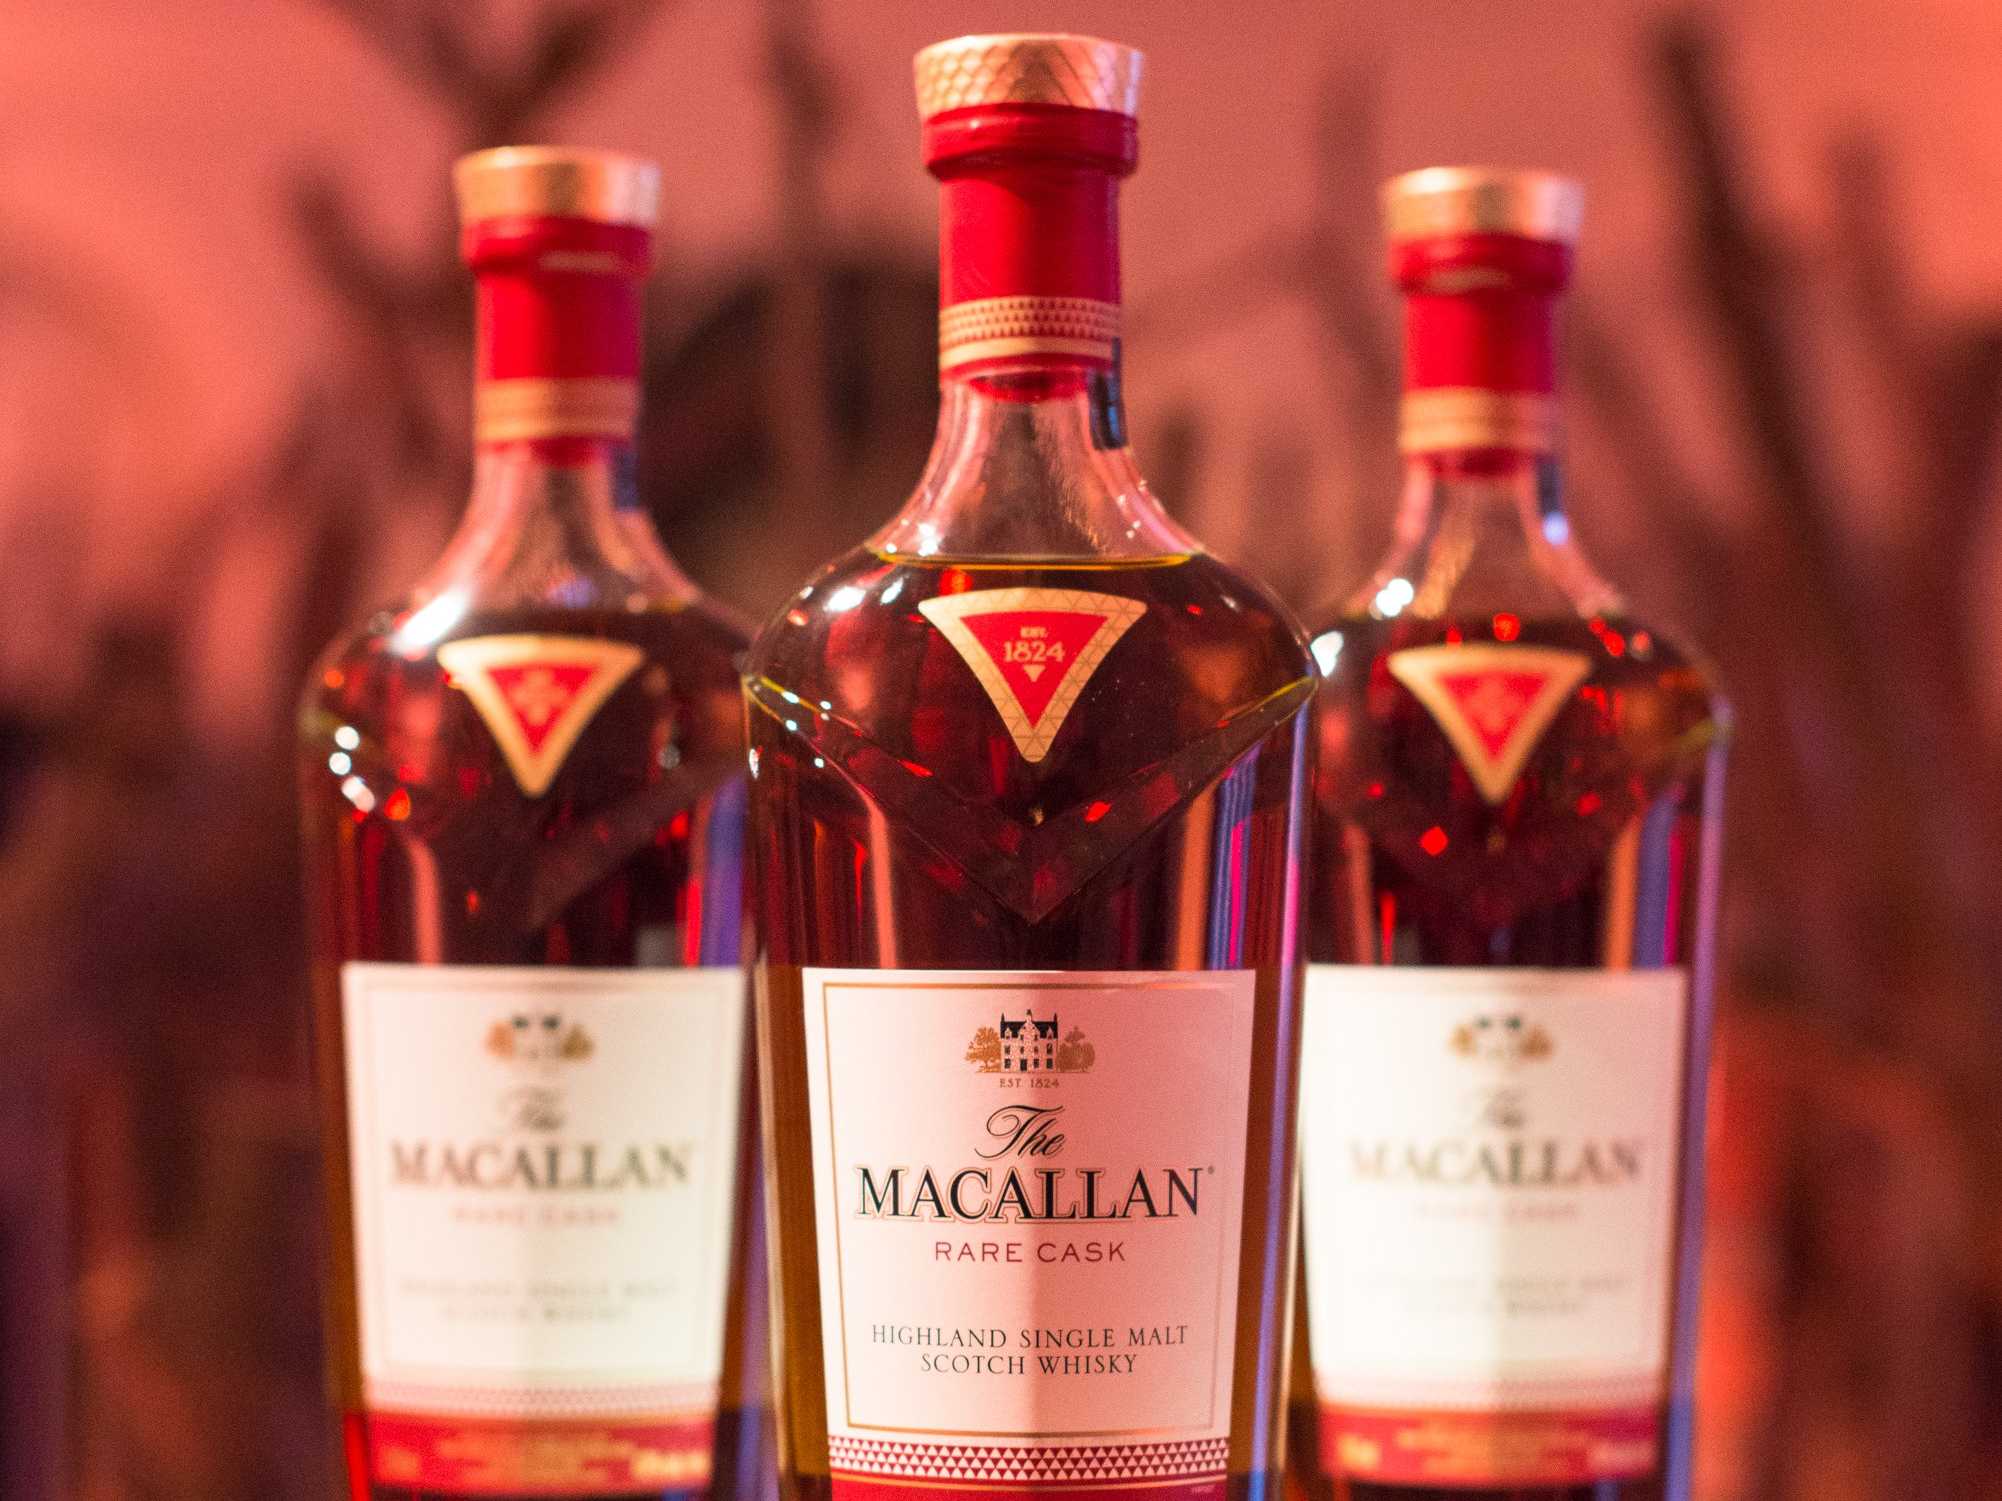 Why The Macallan Rare Cask should be your next whisky buy